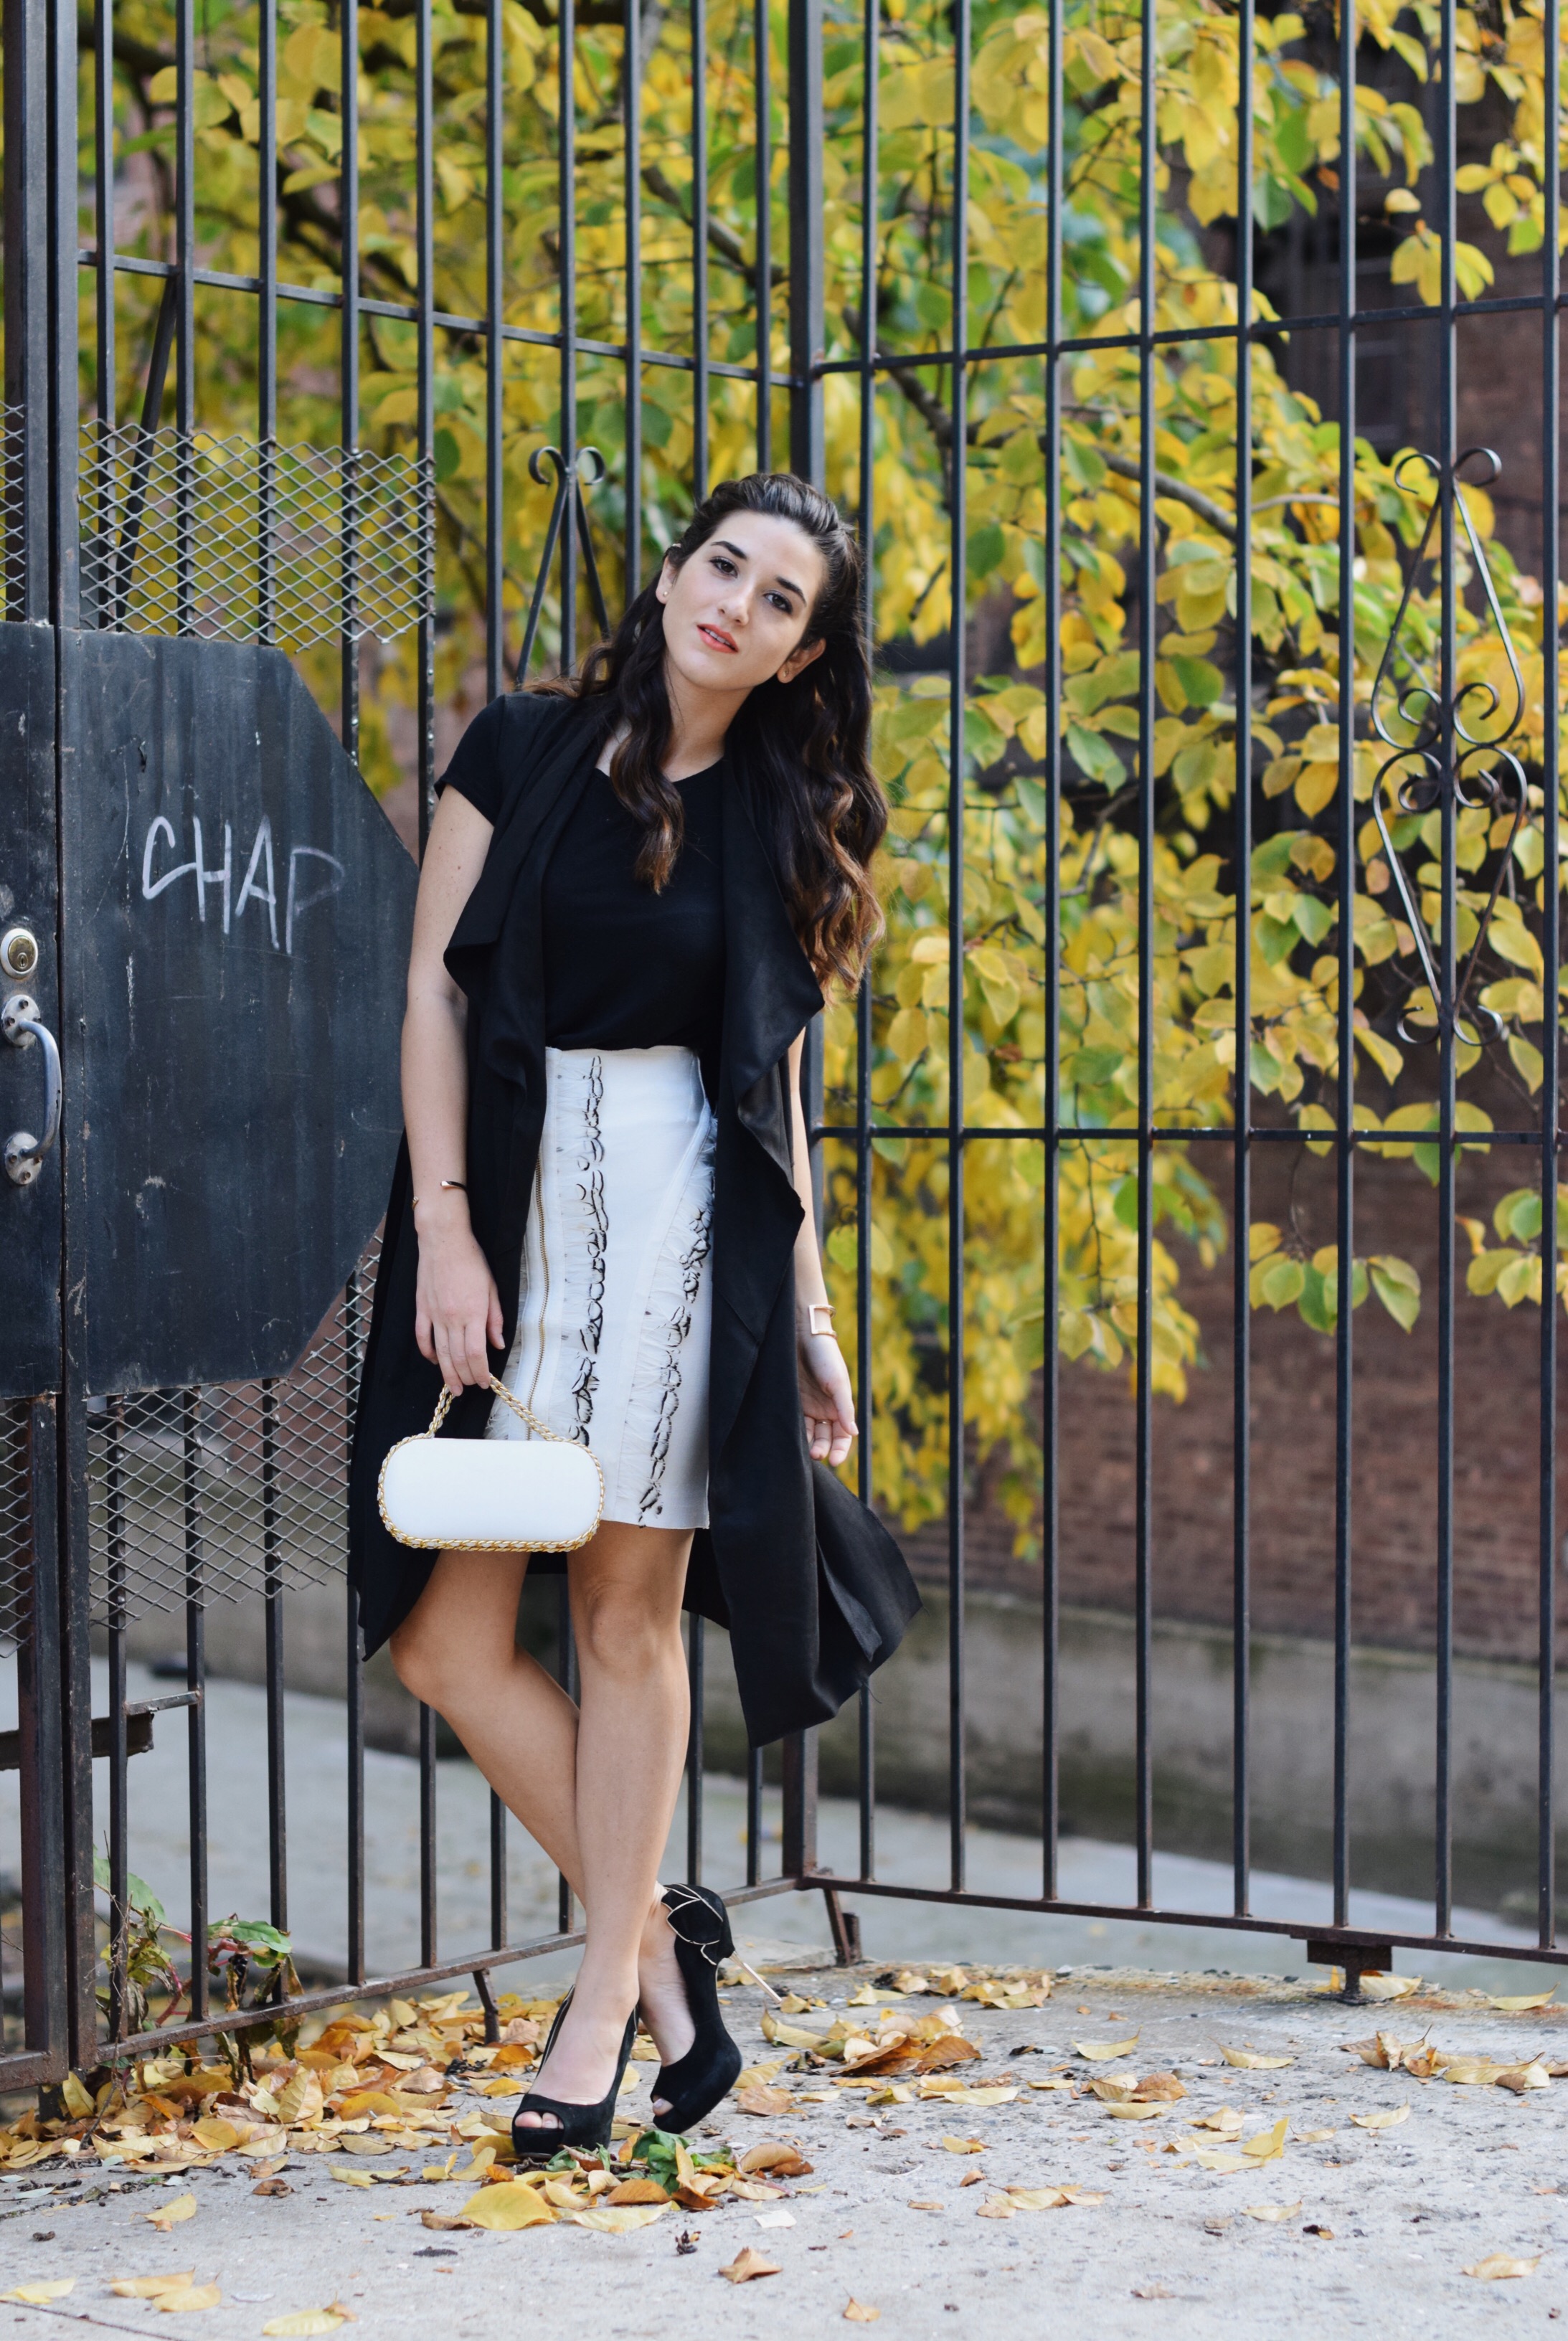 White Feather Skirt Long Black Vest Wow Couture Louboutins & Love Fashion Blog Esther Santer NYC Street Style Blogger Photoshoot Hairstyle Inspo Heels Gold Black Tee Zara Outfit OOTD Beauty Braid Winter Fall Girl Women Model Erin Dana White Minaudiere.JPG